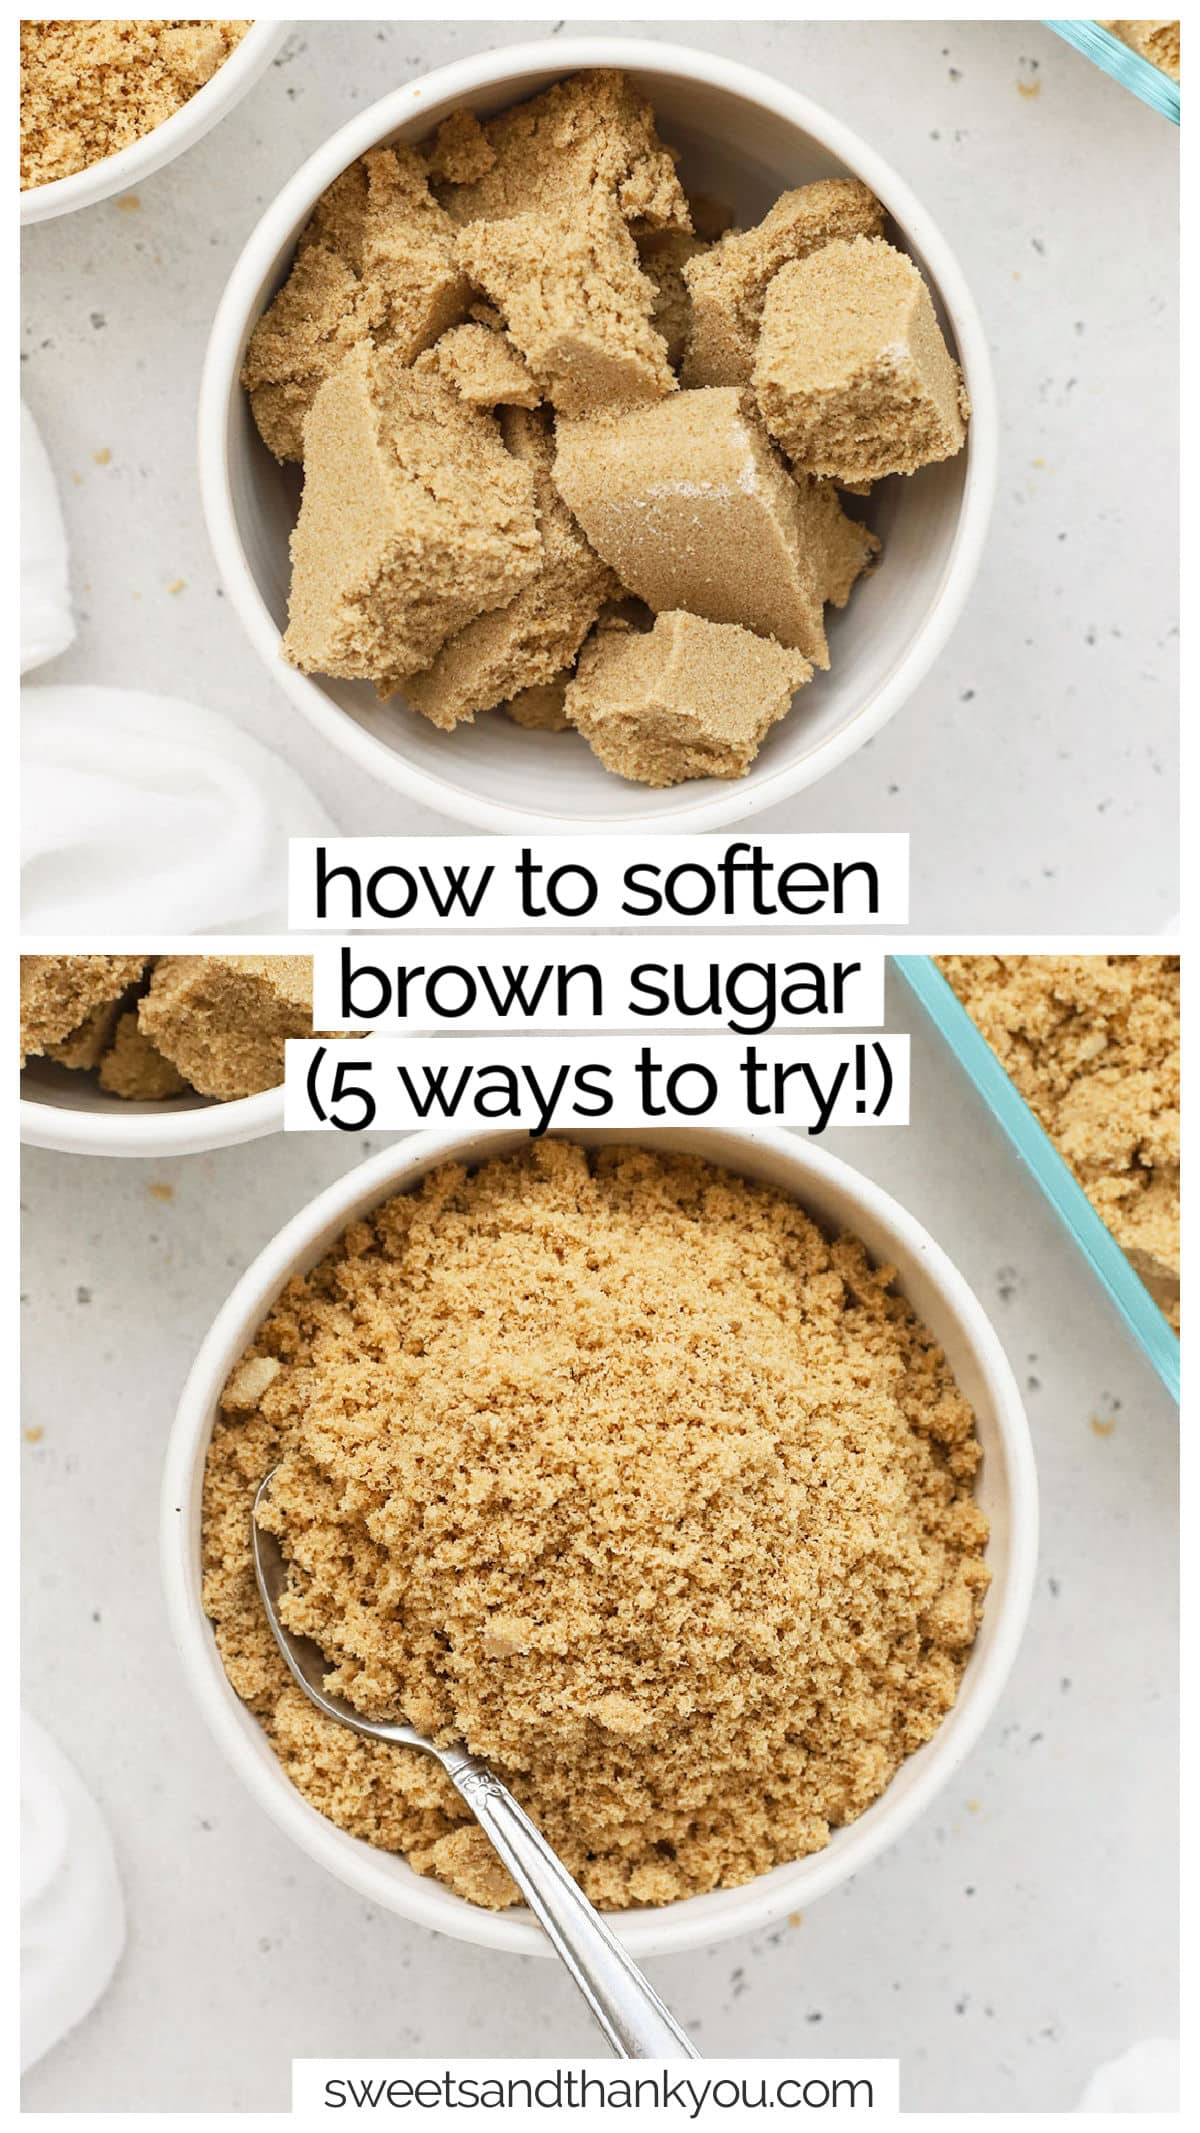 How Do You Soften Hard Brown Sugar? We've got 5 of the BEST ways to soften brown sugar for baking + how to keep it soft (#3 is my favorite!) We've got all the tips and tricks for softening brown sugar!  We'll show you how to soften brown sugar in the microwave or oven, how to soften it with a piece of bread (really!), and how to keep brown sugar soft. 